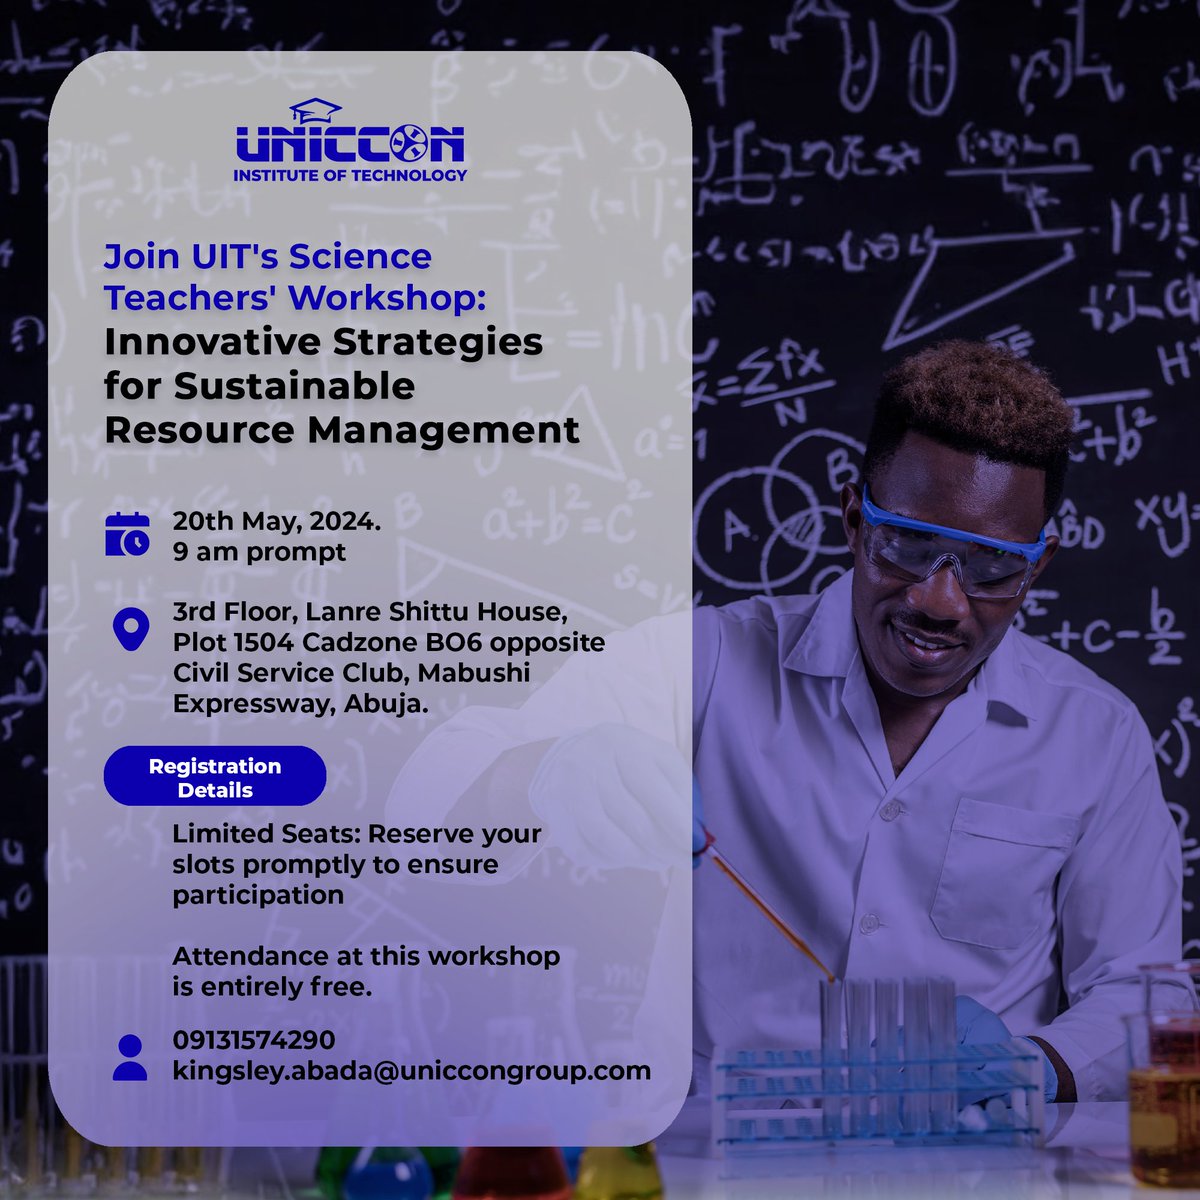 Calling all science educators! Don't miss out on UIT's Science Teachers' Workshop. Dive into practical approaches and boost your curriculum with cutting-edge insights. Limited spots are available, reserve yours now! ##scienceeducation #teacherworkshop #stem #scienceintech